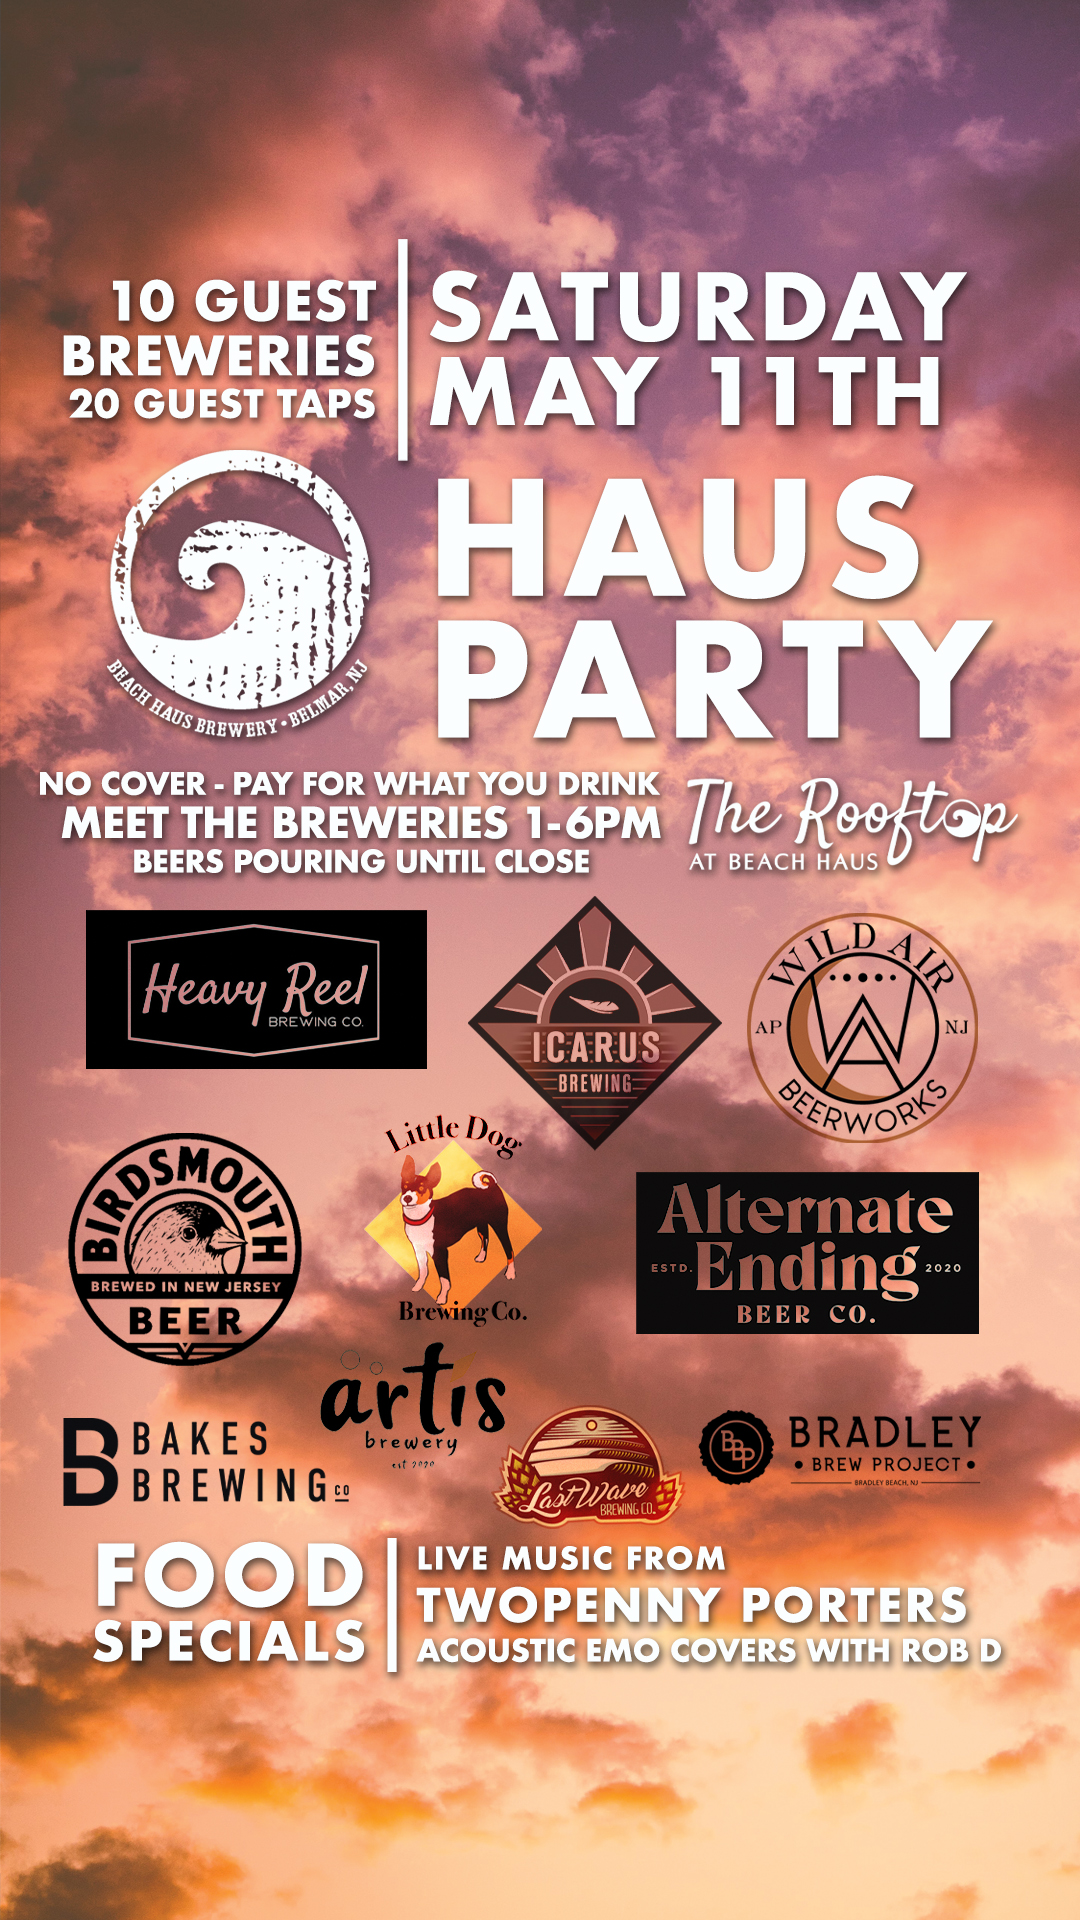 Haus Party on The Rooftop with 10 guest breweries